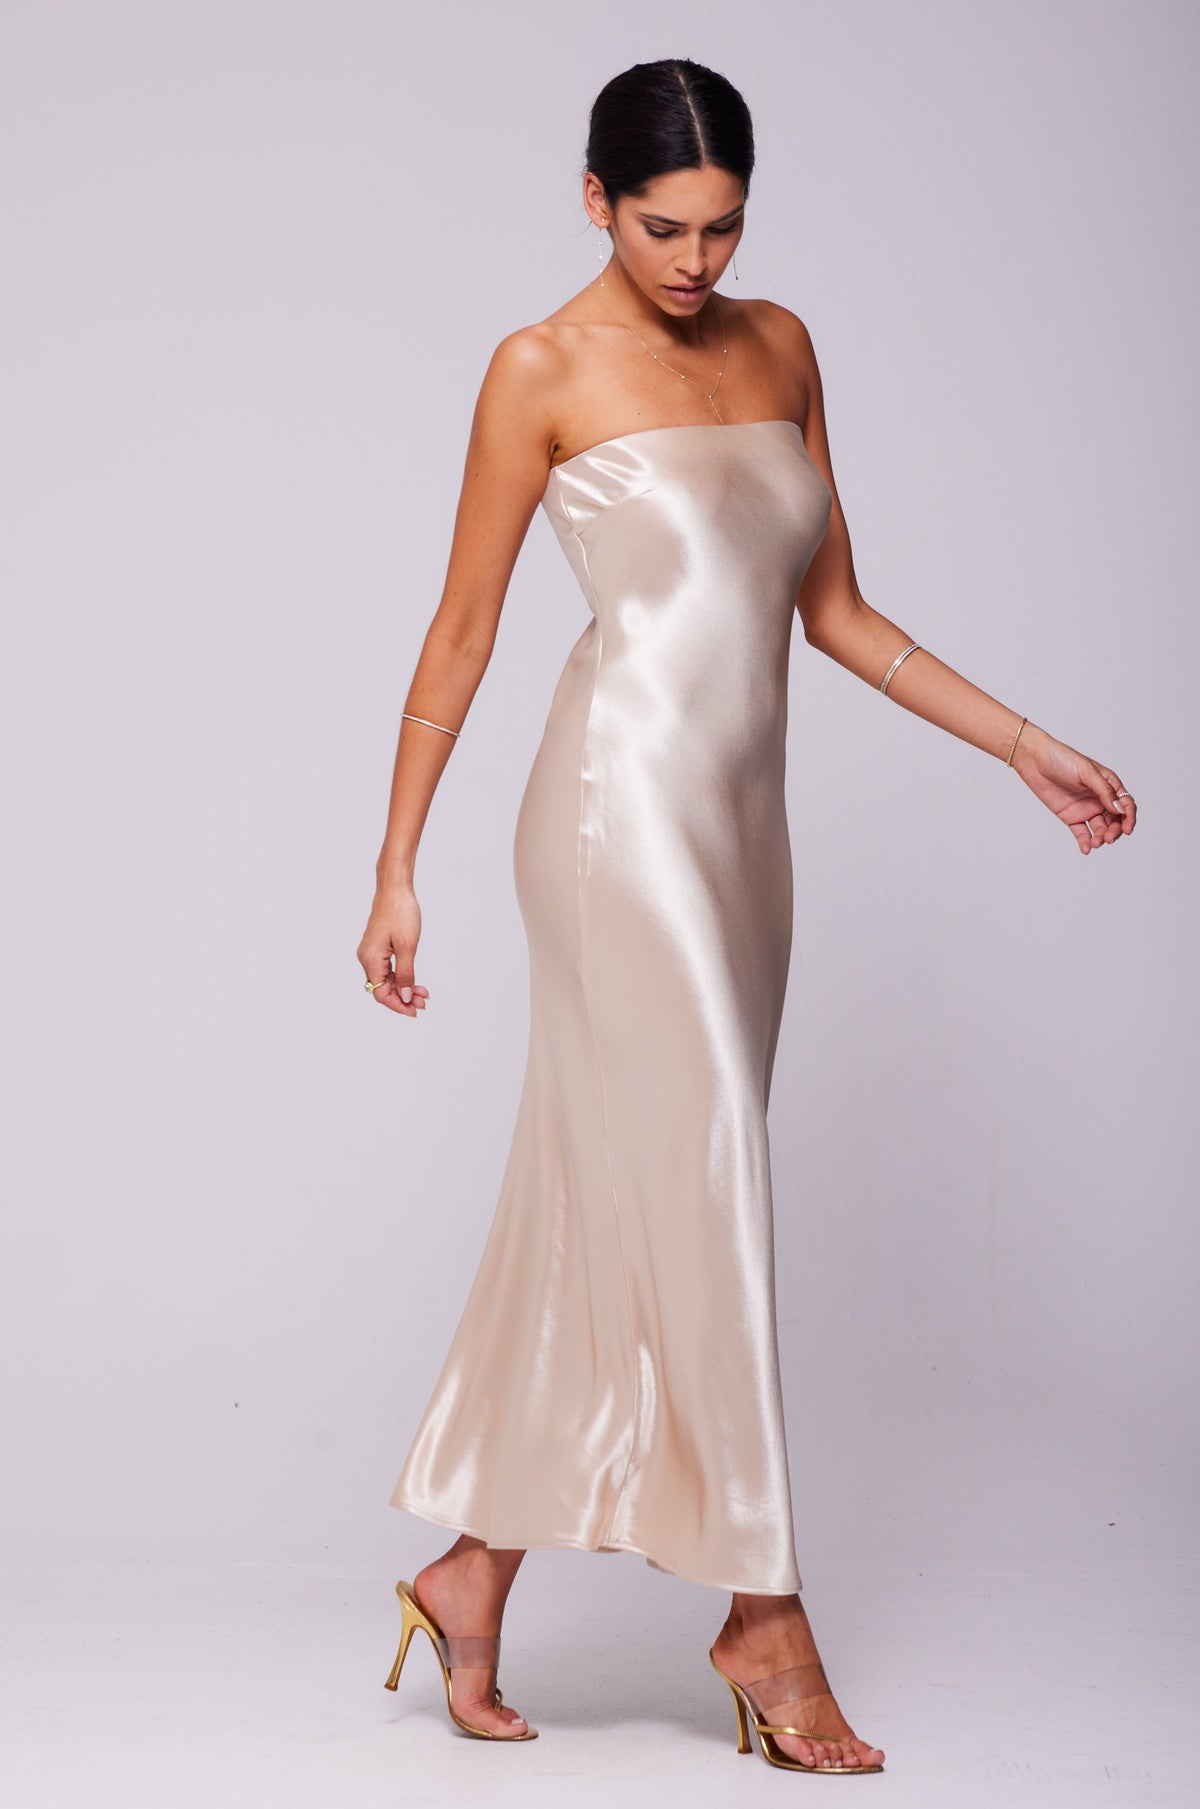 This is an image of Anna Slip in Champagne - RESA featuring a model wearing the dress